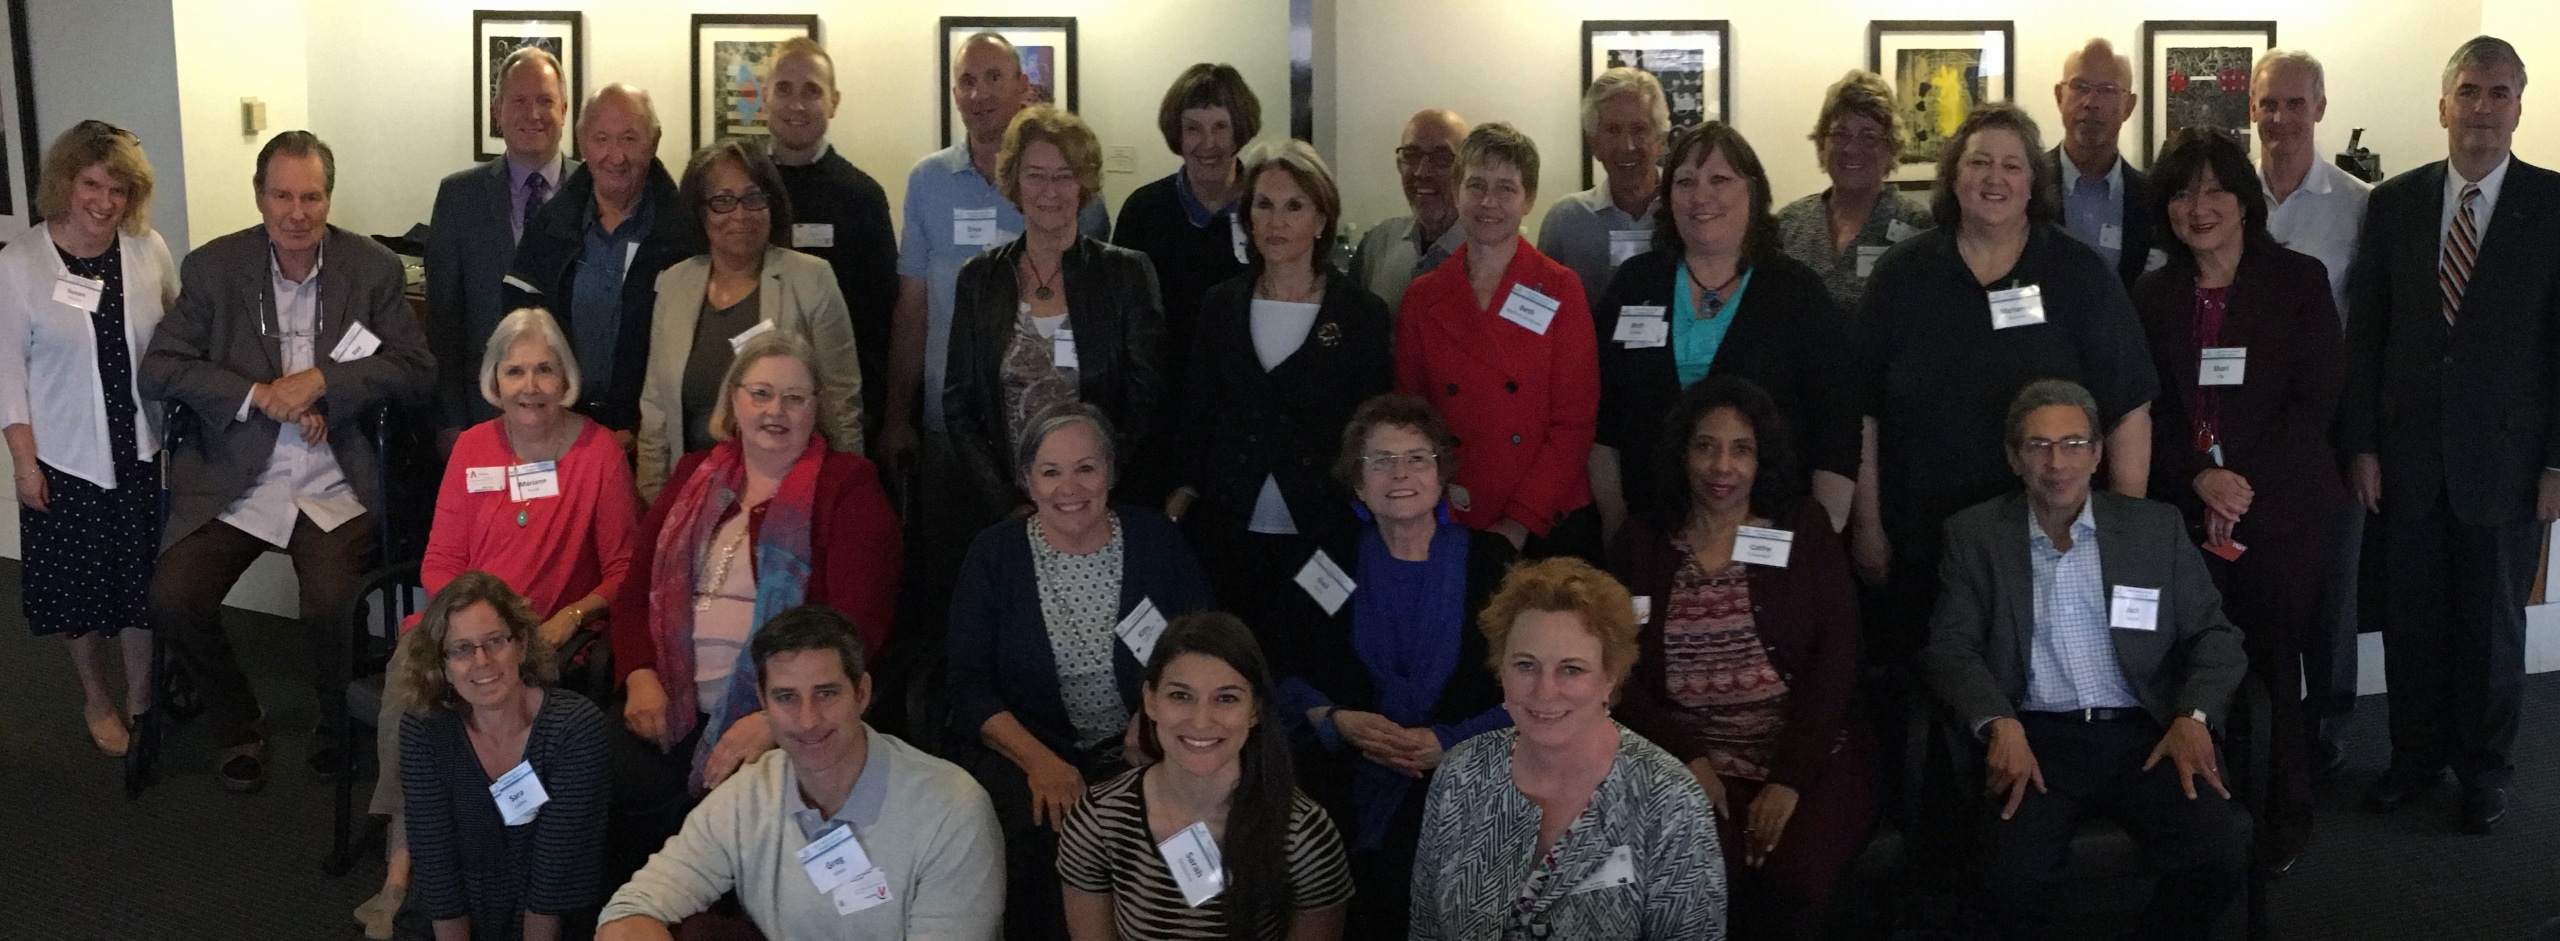 Senior Patient and Family Caregiver Network Holds First Advocate Mentor Training